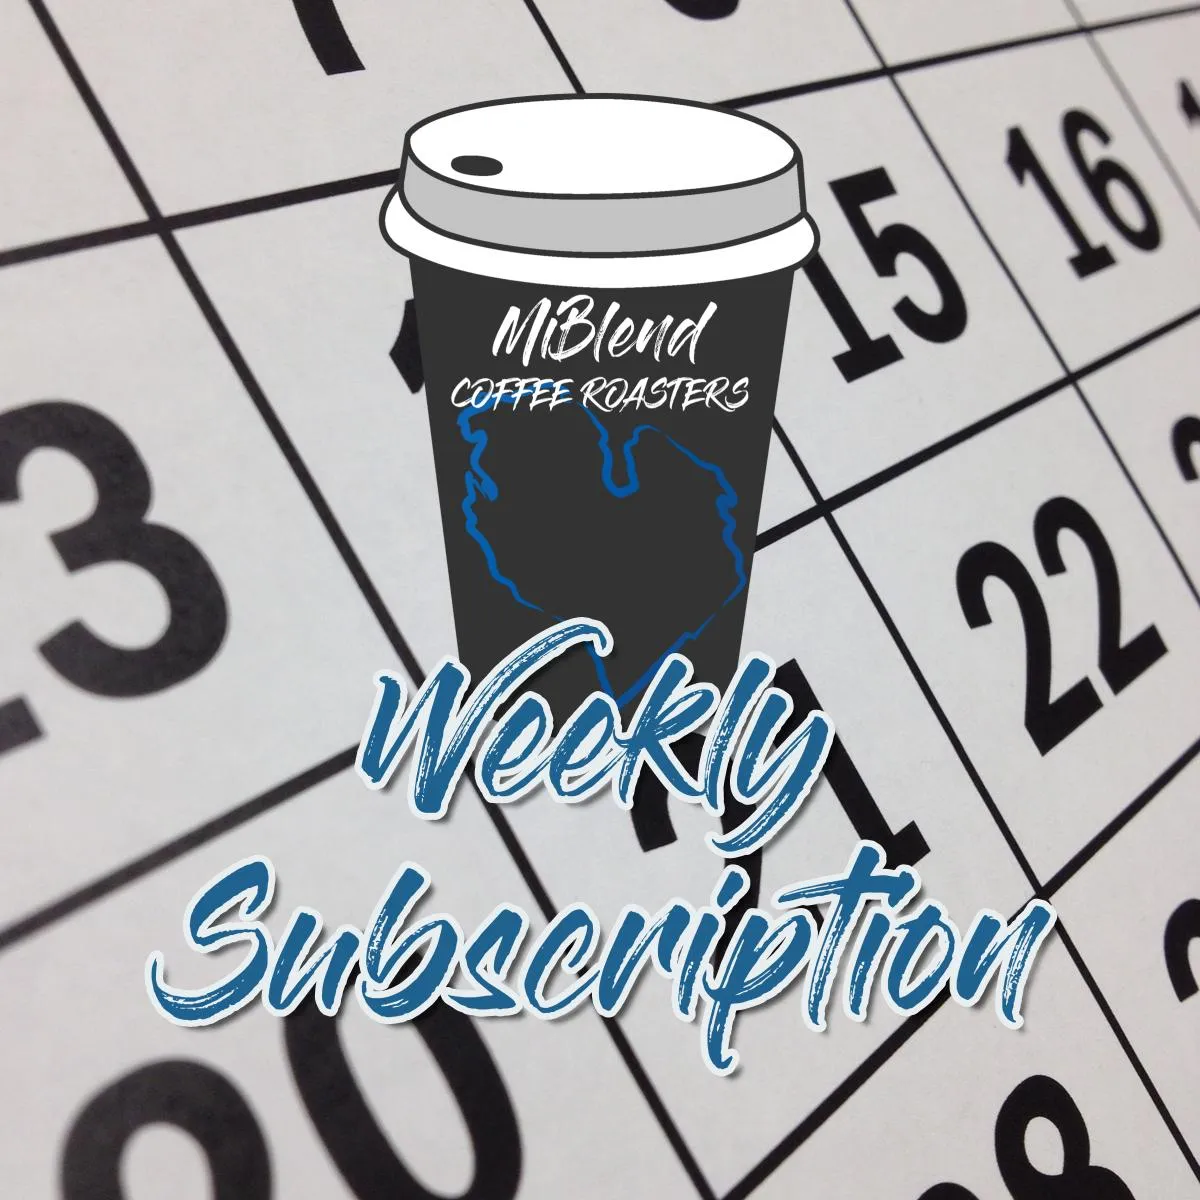 WEEKLY SUBSCRIPTION